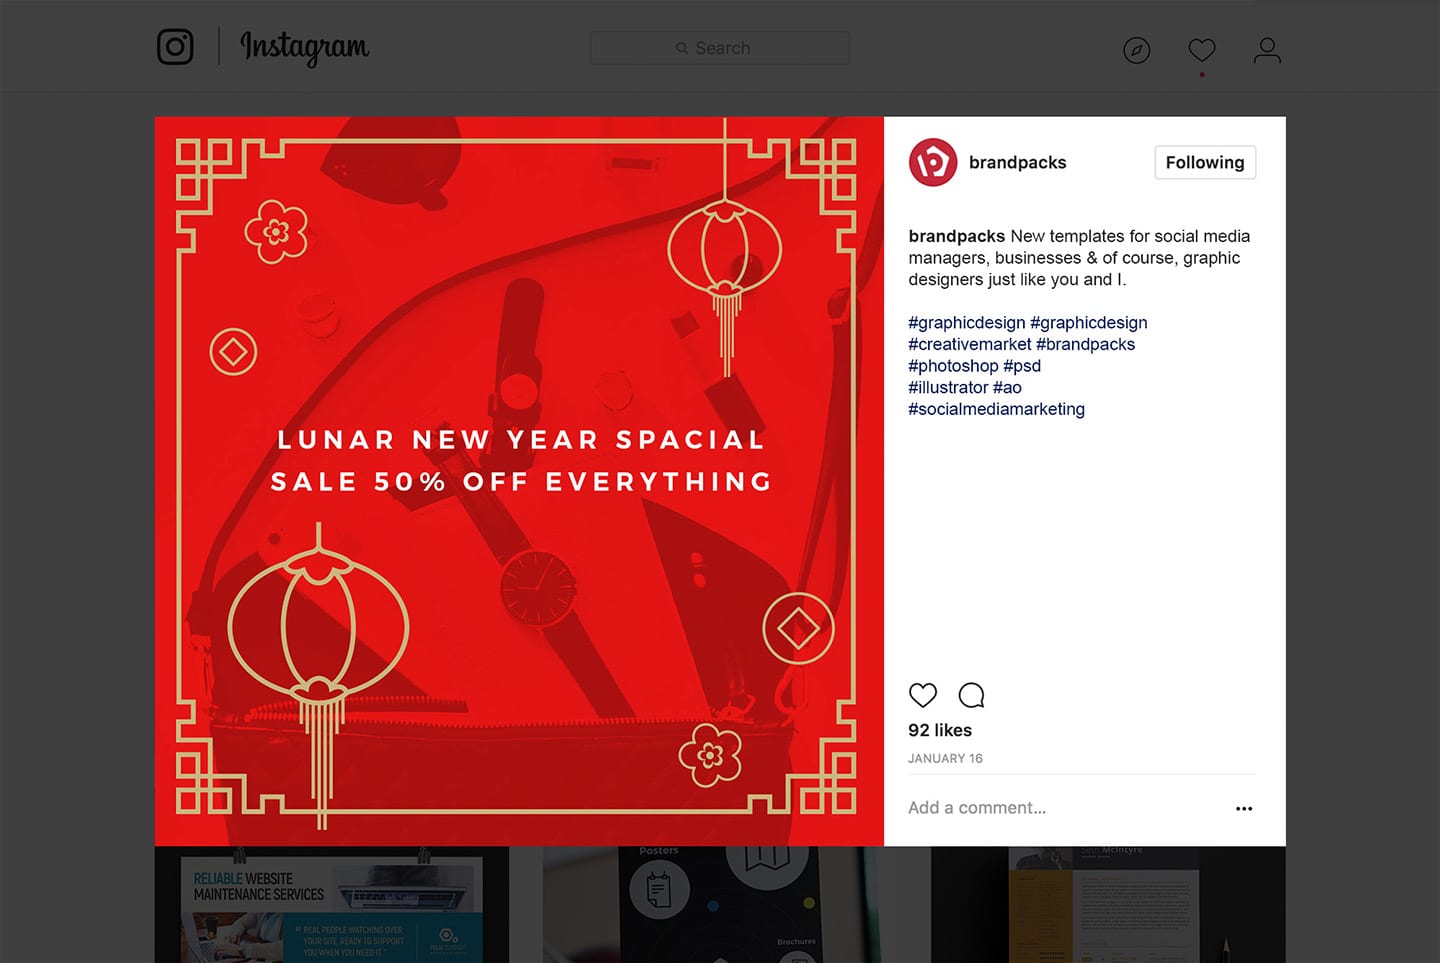 Chinese New Year Social Media Templates